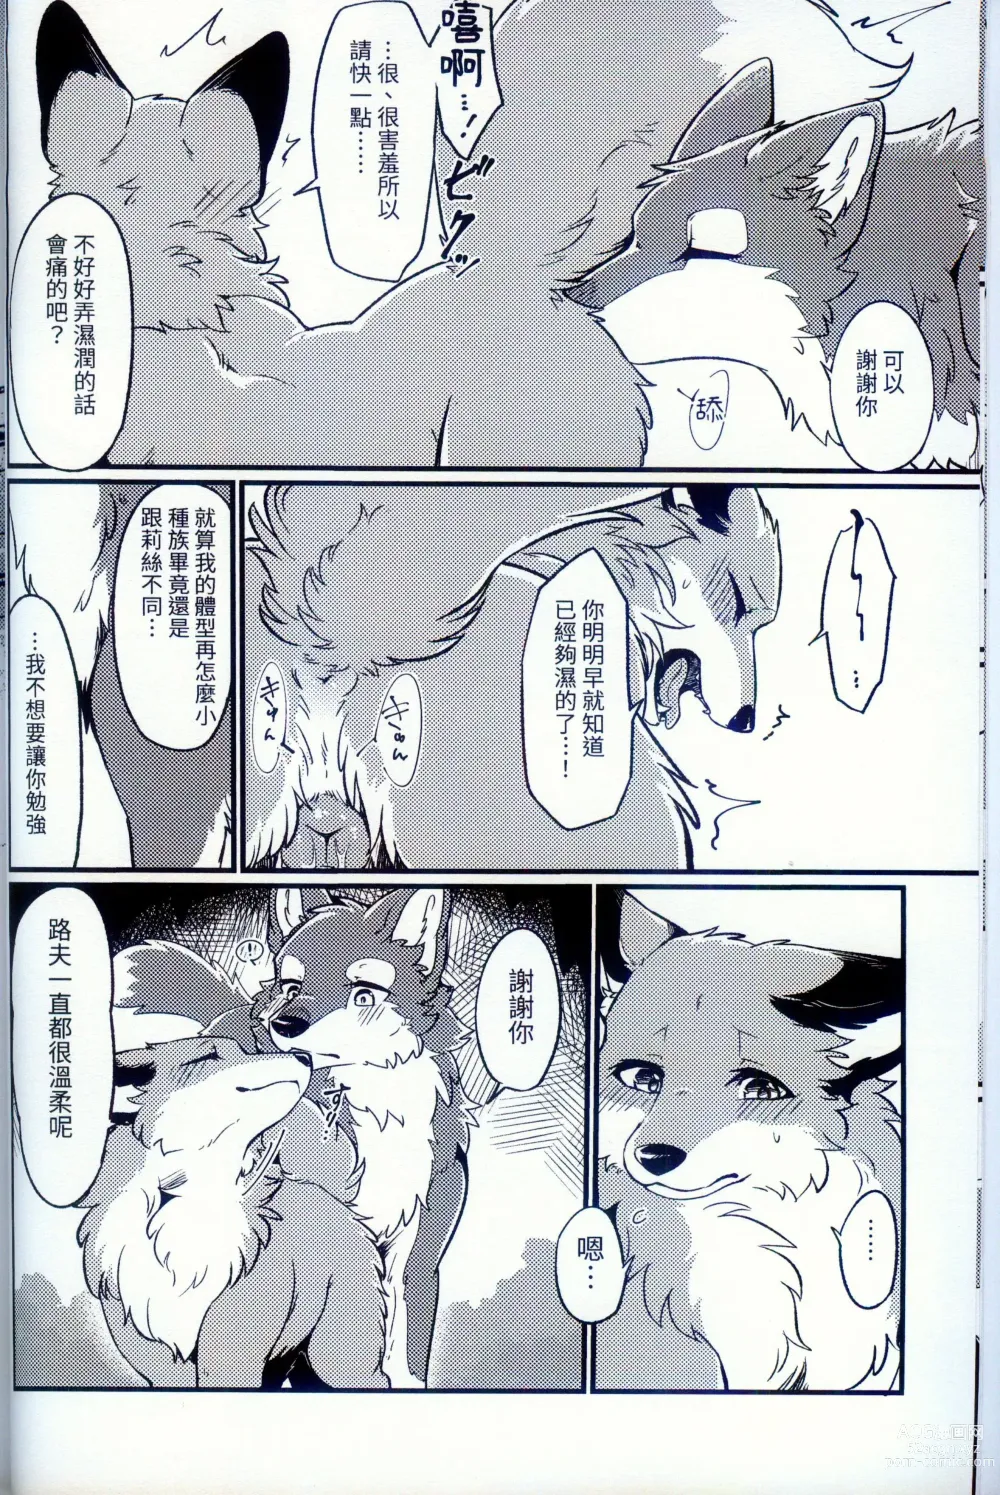 Page 8 of doujinshi IN THE FOREST (decensored)